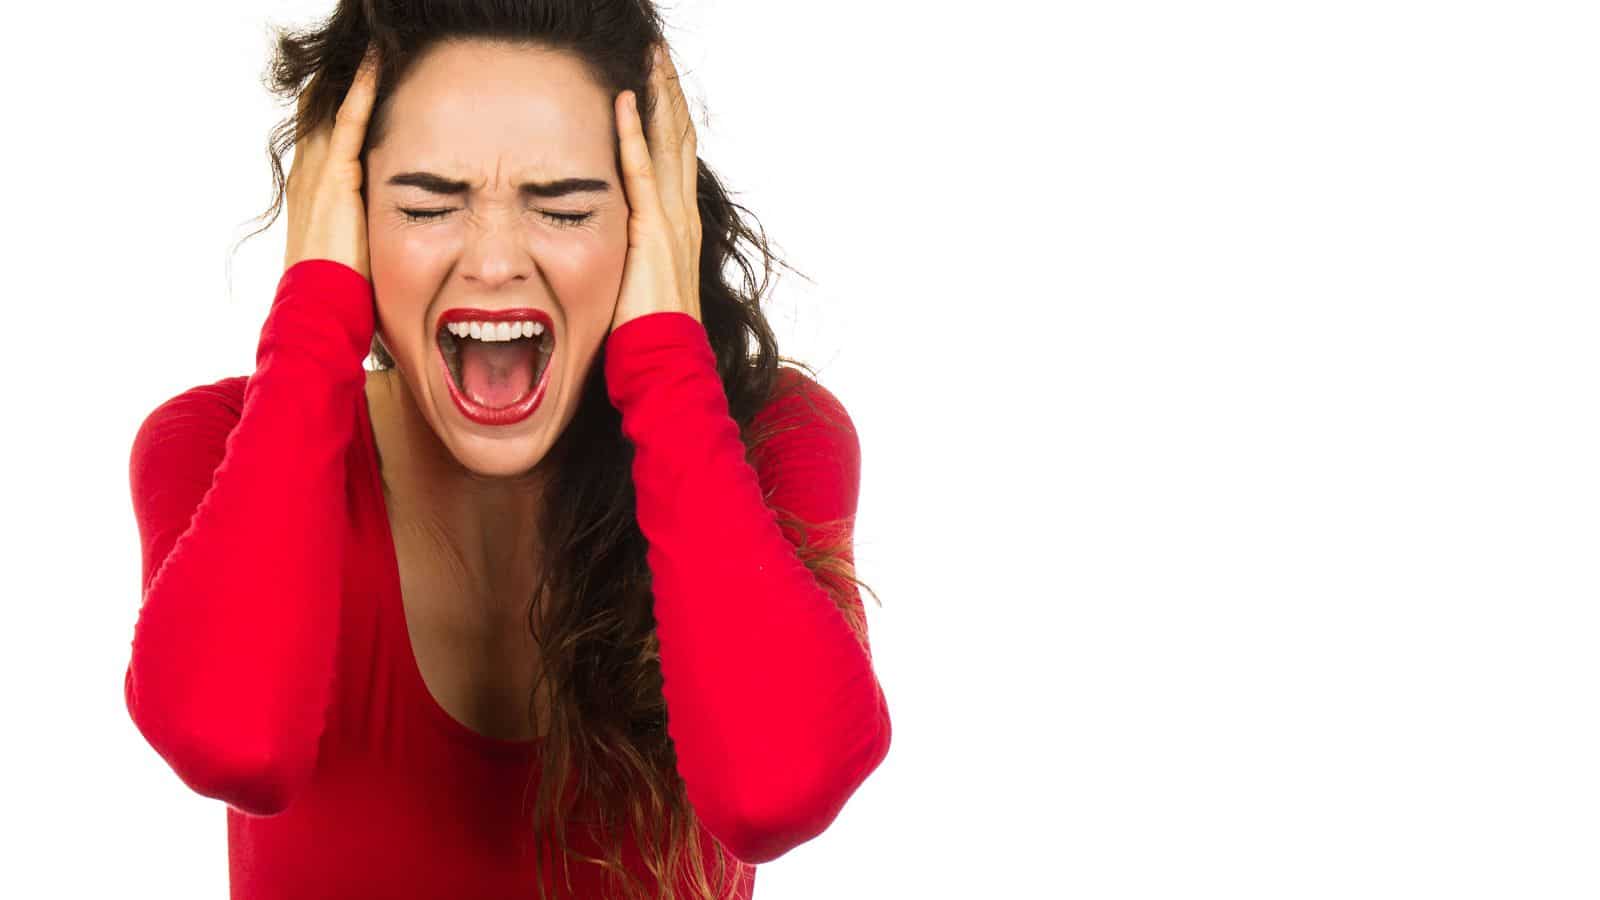 frustrated woman screaming, wearing red shirt and red lipstick